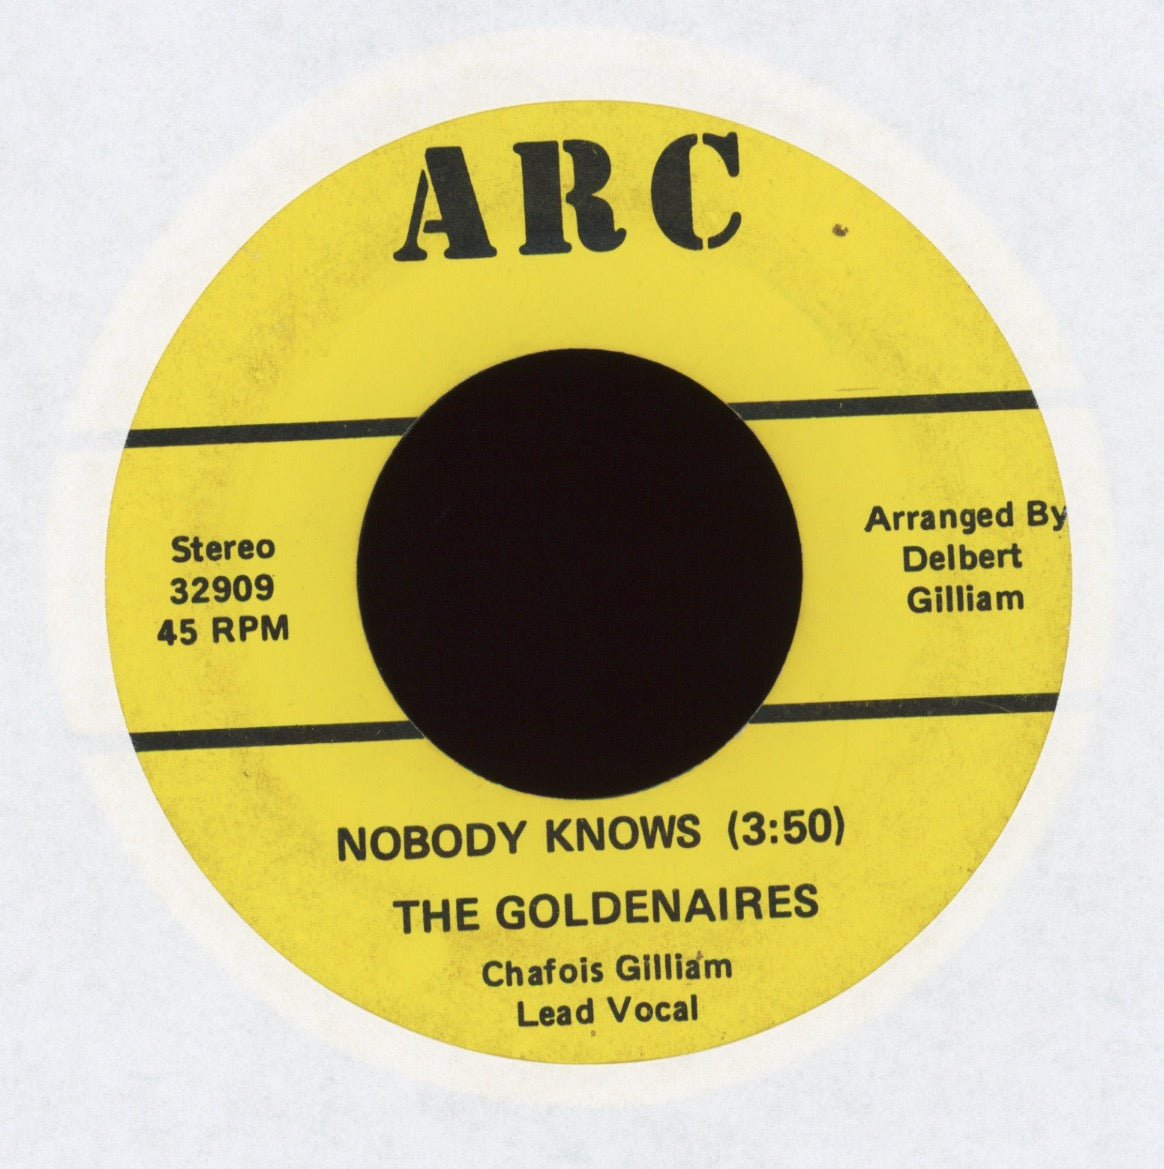 The Goldenaires - Nobody Knows on ARC